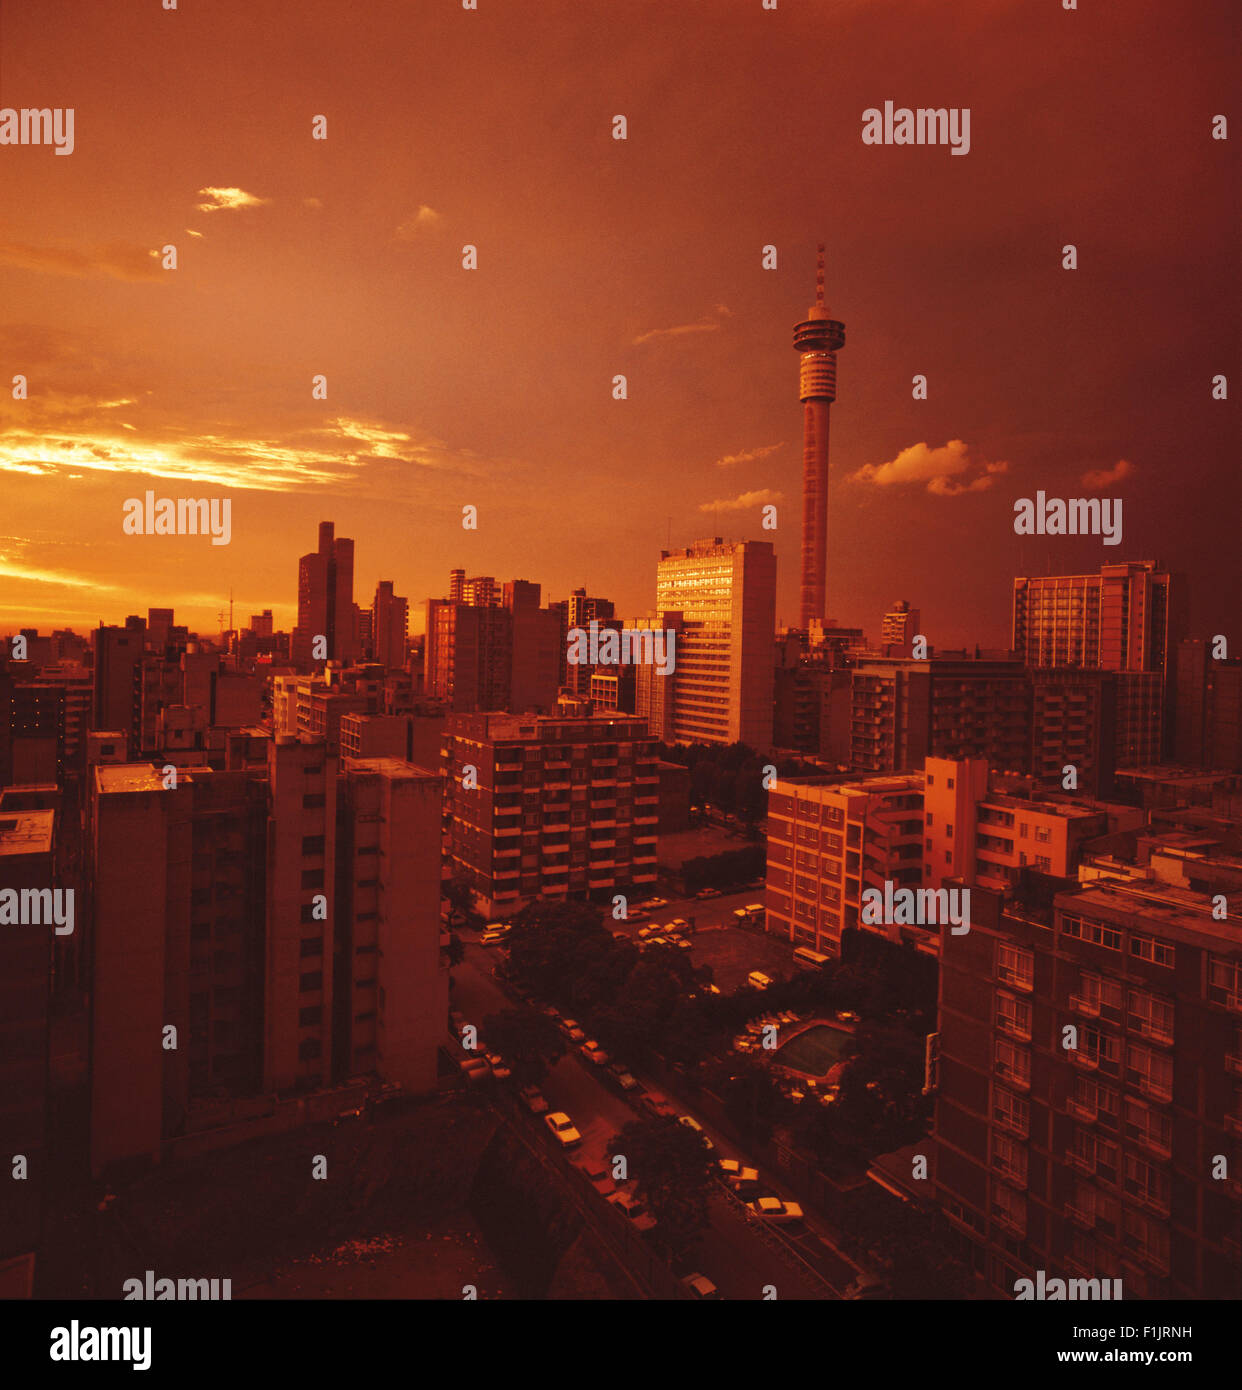 Johannesburg skyline with Hillbrow Tower high-rise buildings at sunset. Johannesburg, Gauteng Province, South Africa, Africa. Stock Photo